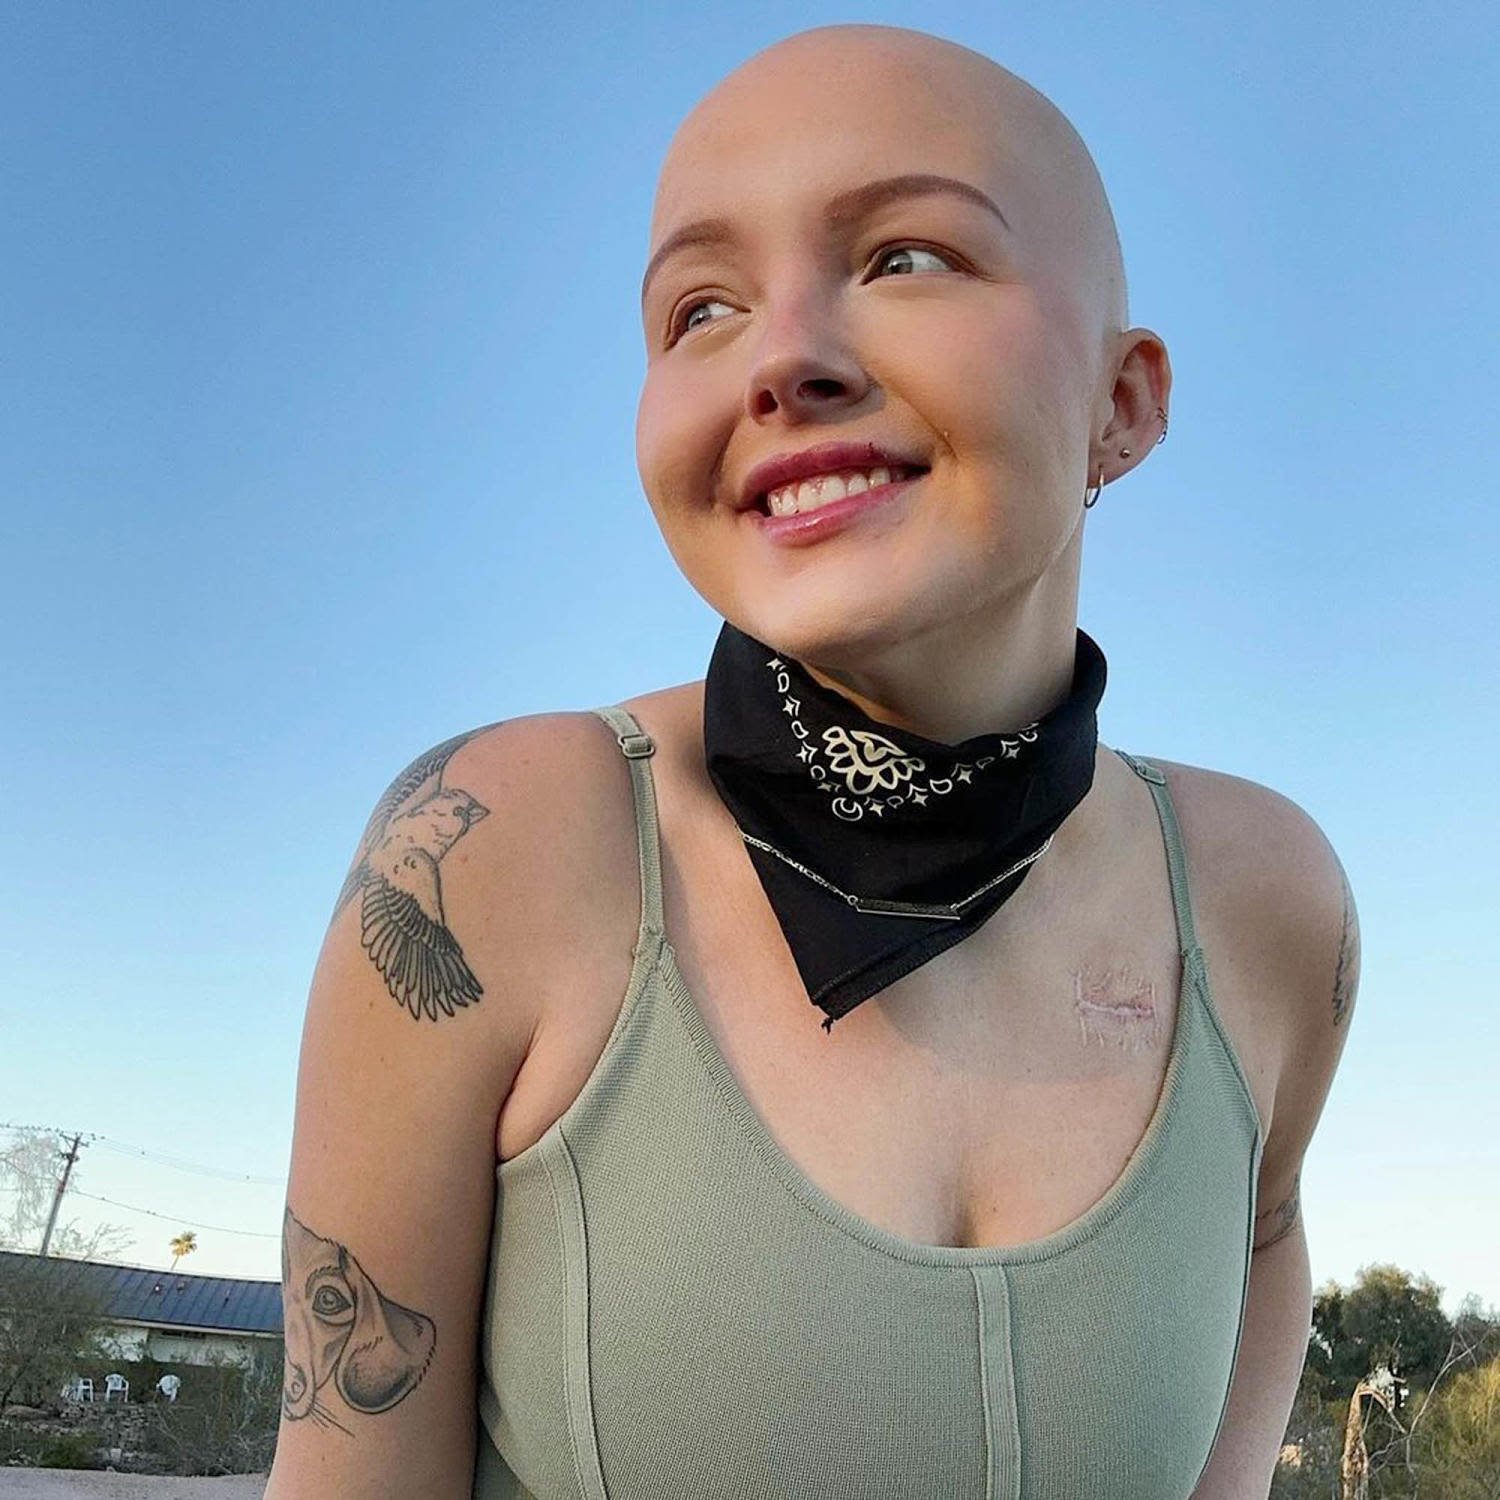 Maddy Baloy, 26-year-old who documented her terminal cancer journey on TikTok, dies